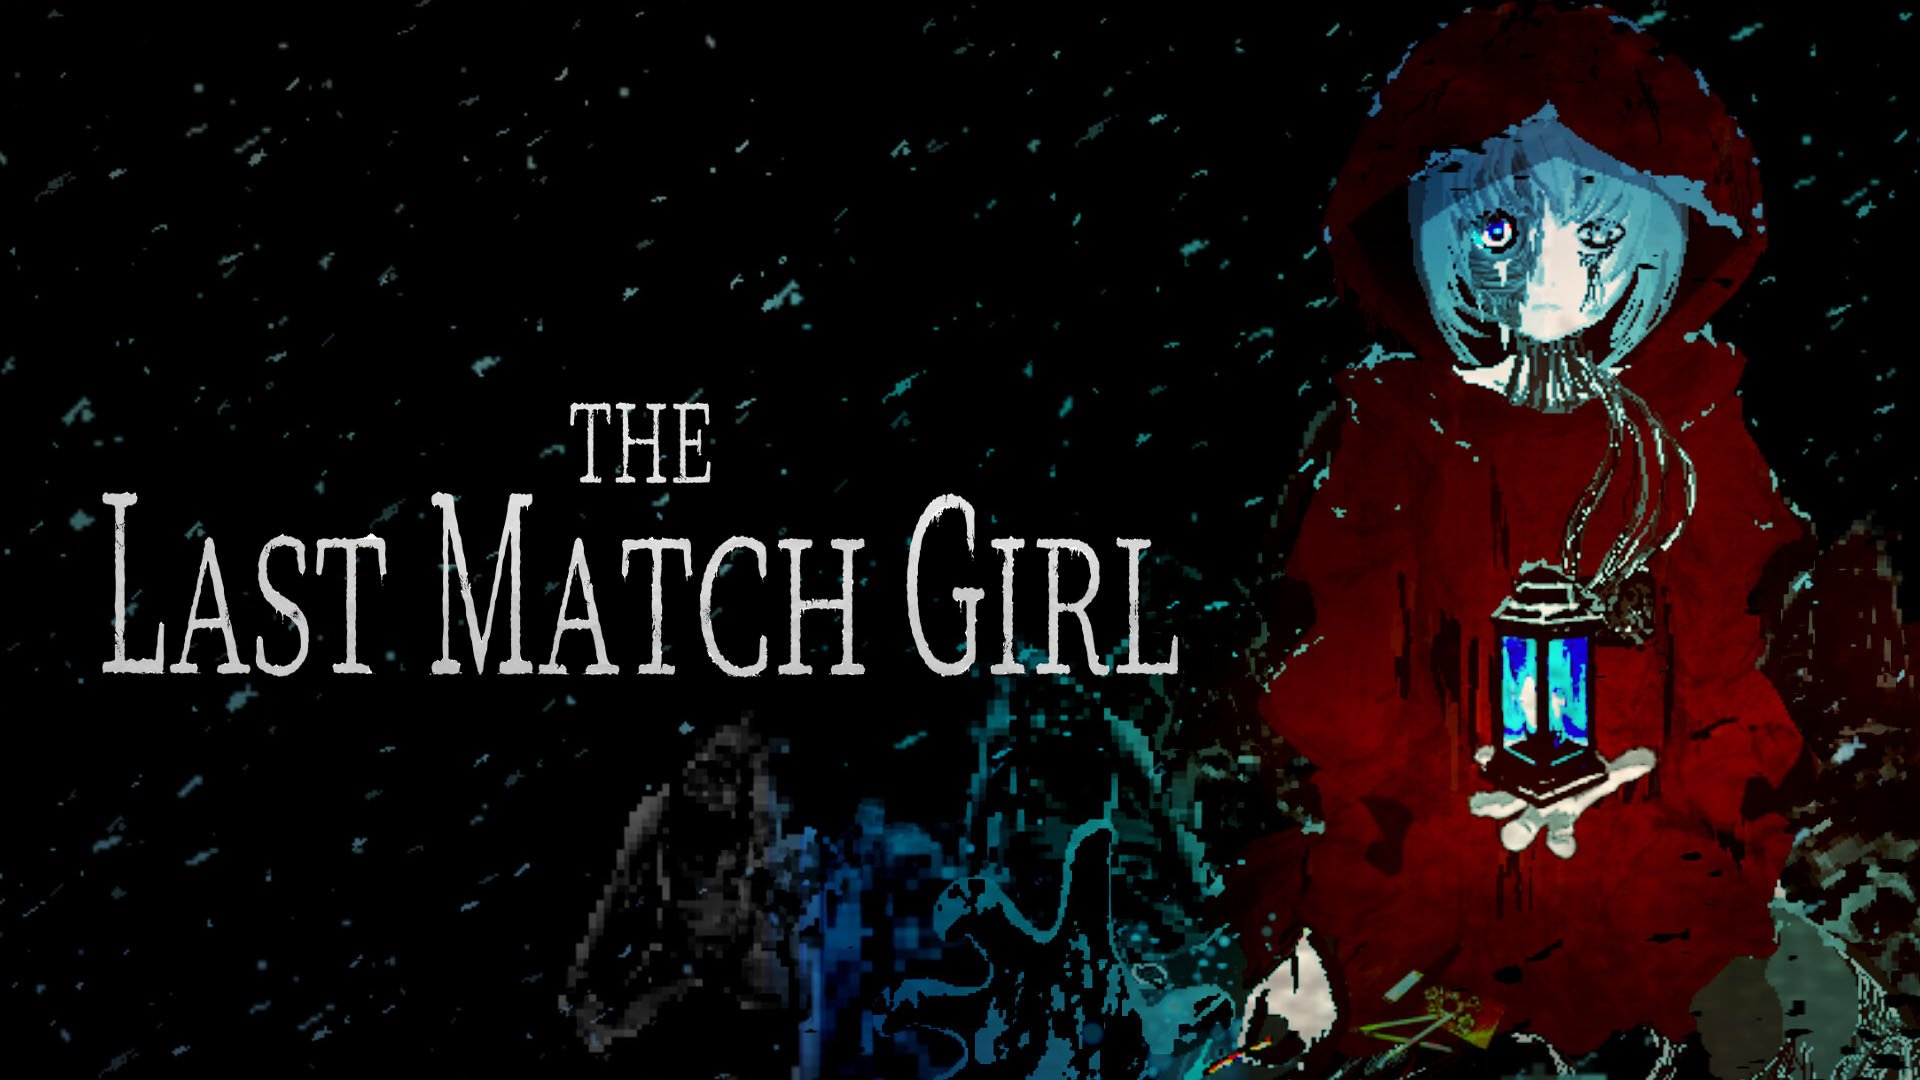 #
      Side-scrolling survival horror game THE LAST MATCH GIRL announced for PC